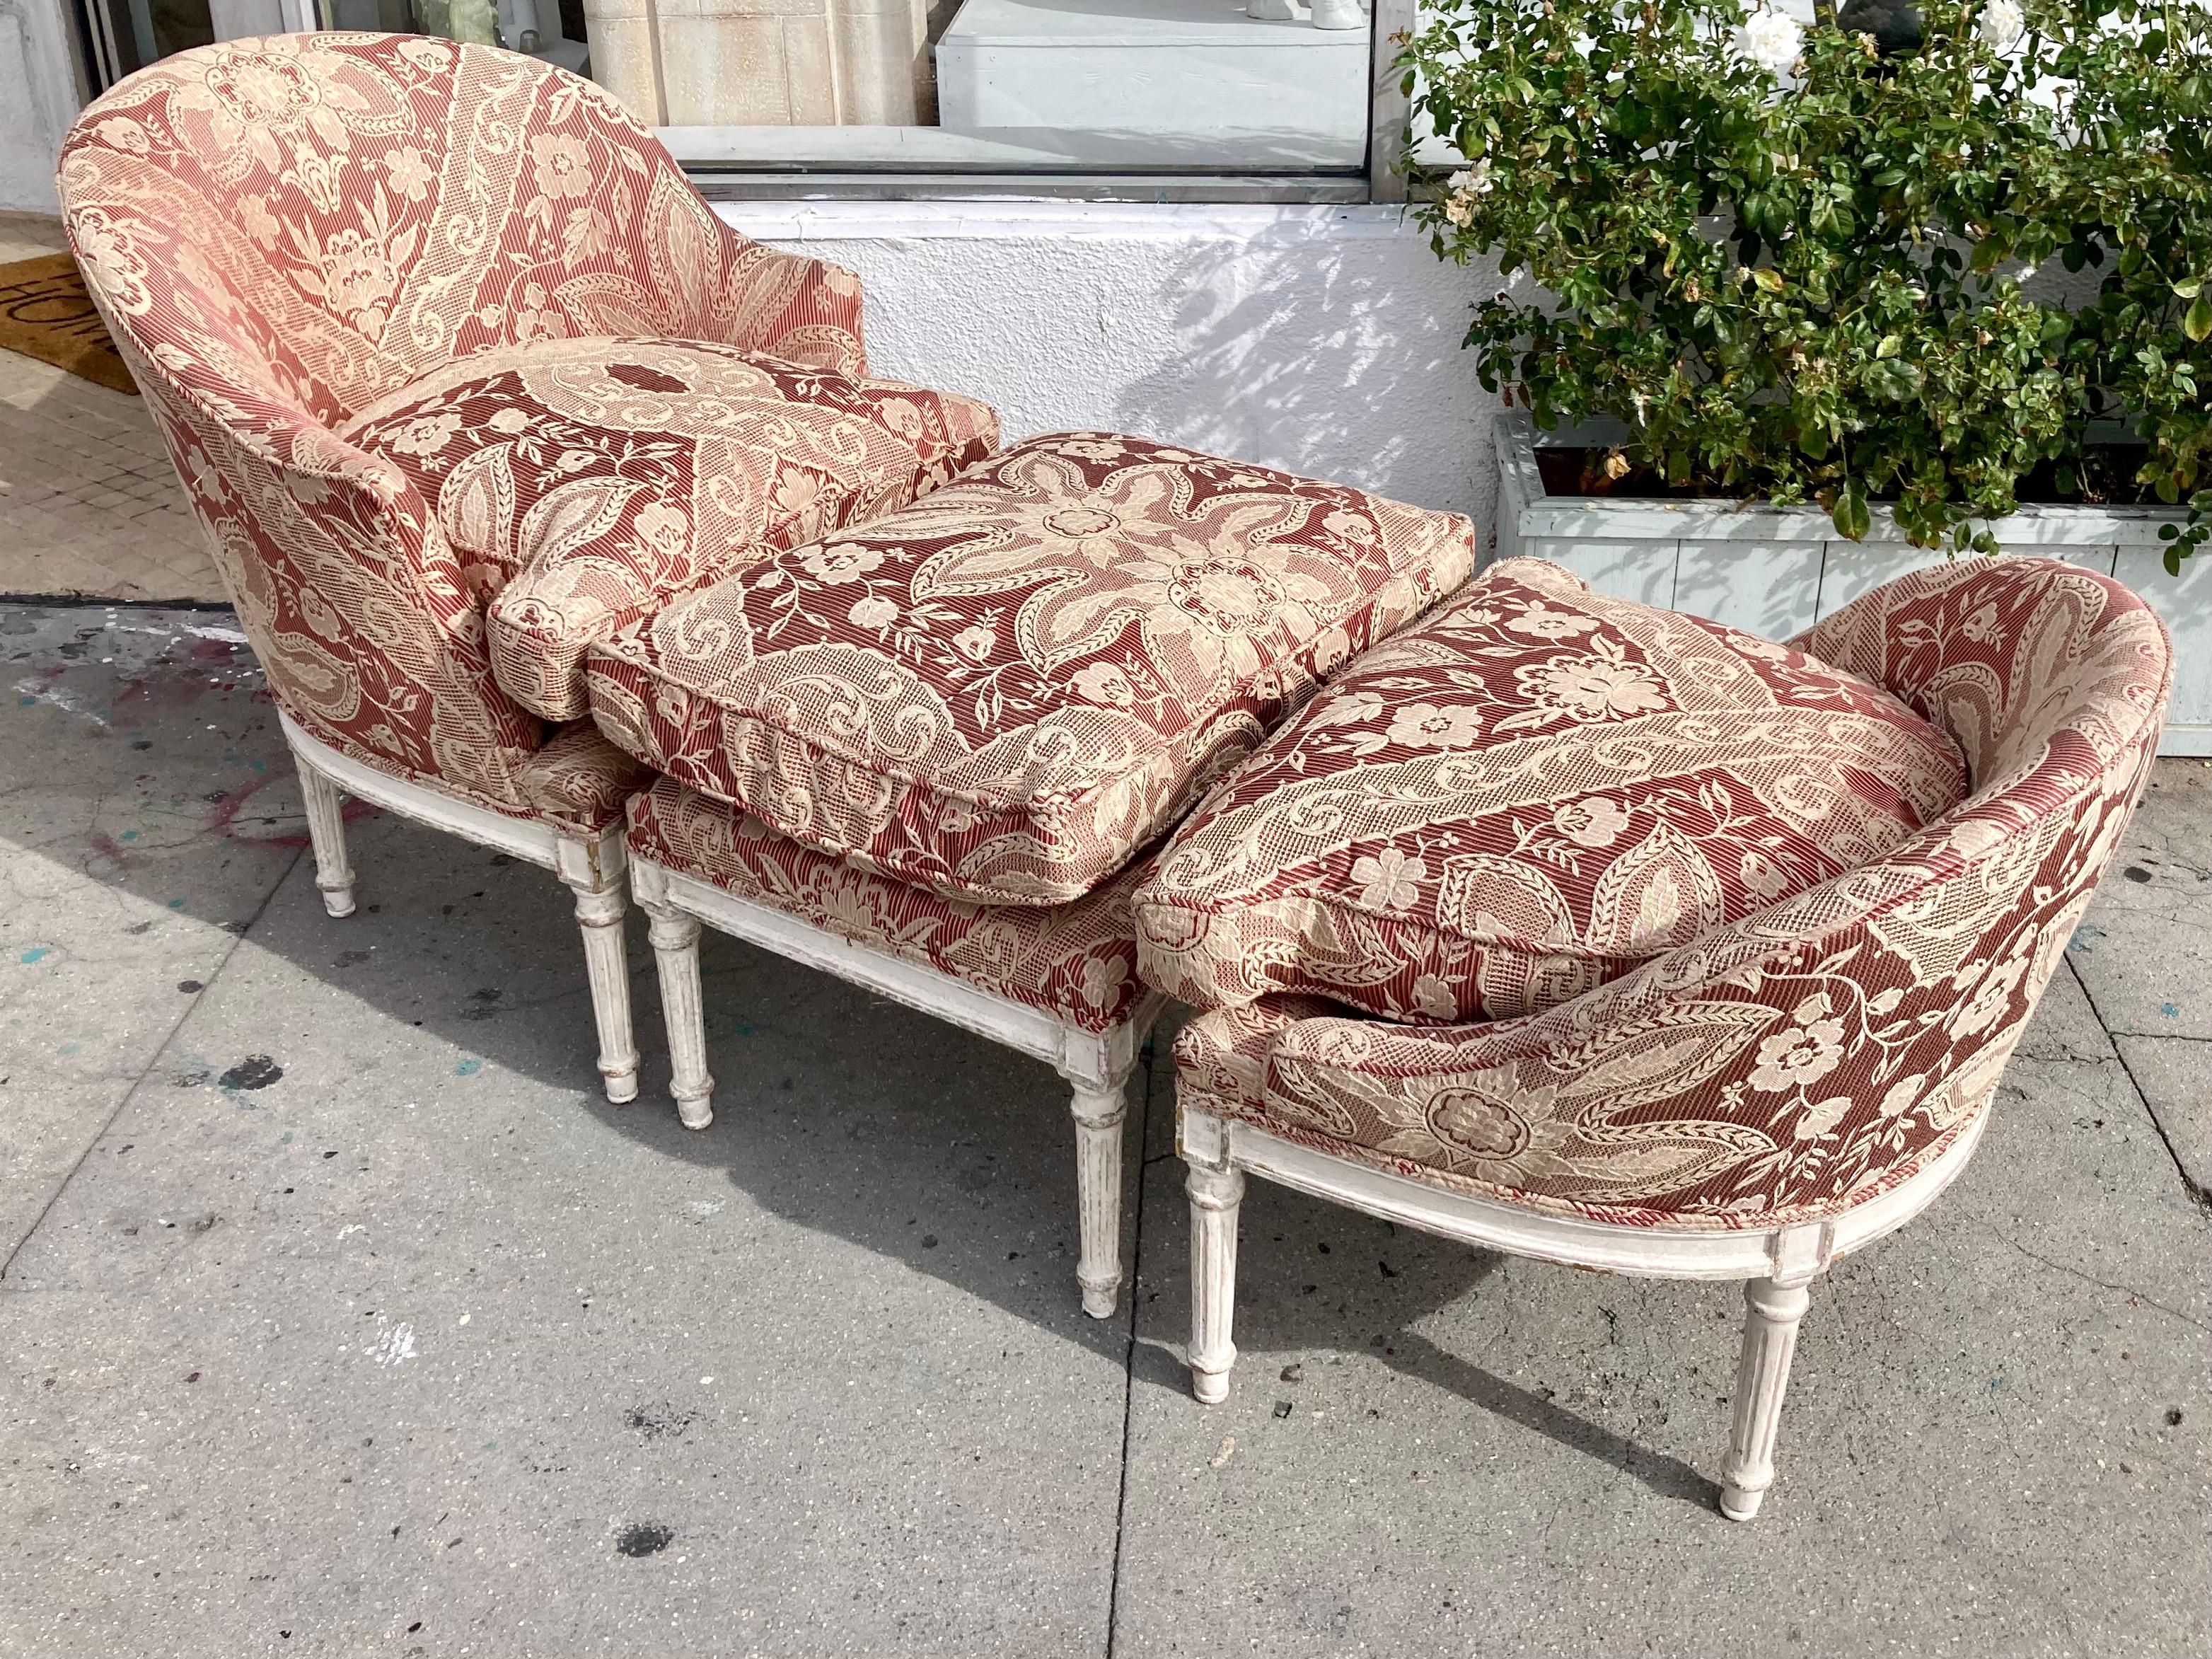 Beautiful unique three-piece French Louis XVI Duchesse Brisée lounge chair. Pieces include two chairs and an ottoman in the center. New upholstery, but frame in original finish and in great shape.

Additional dimensions
All pieces put together: 24”W